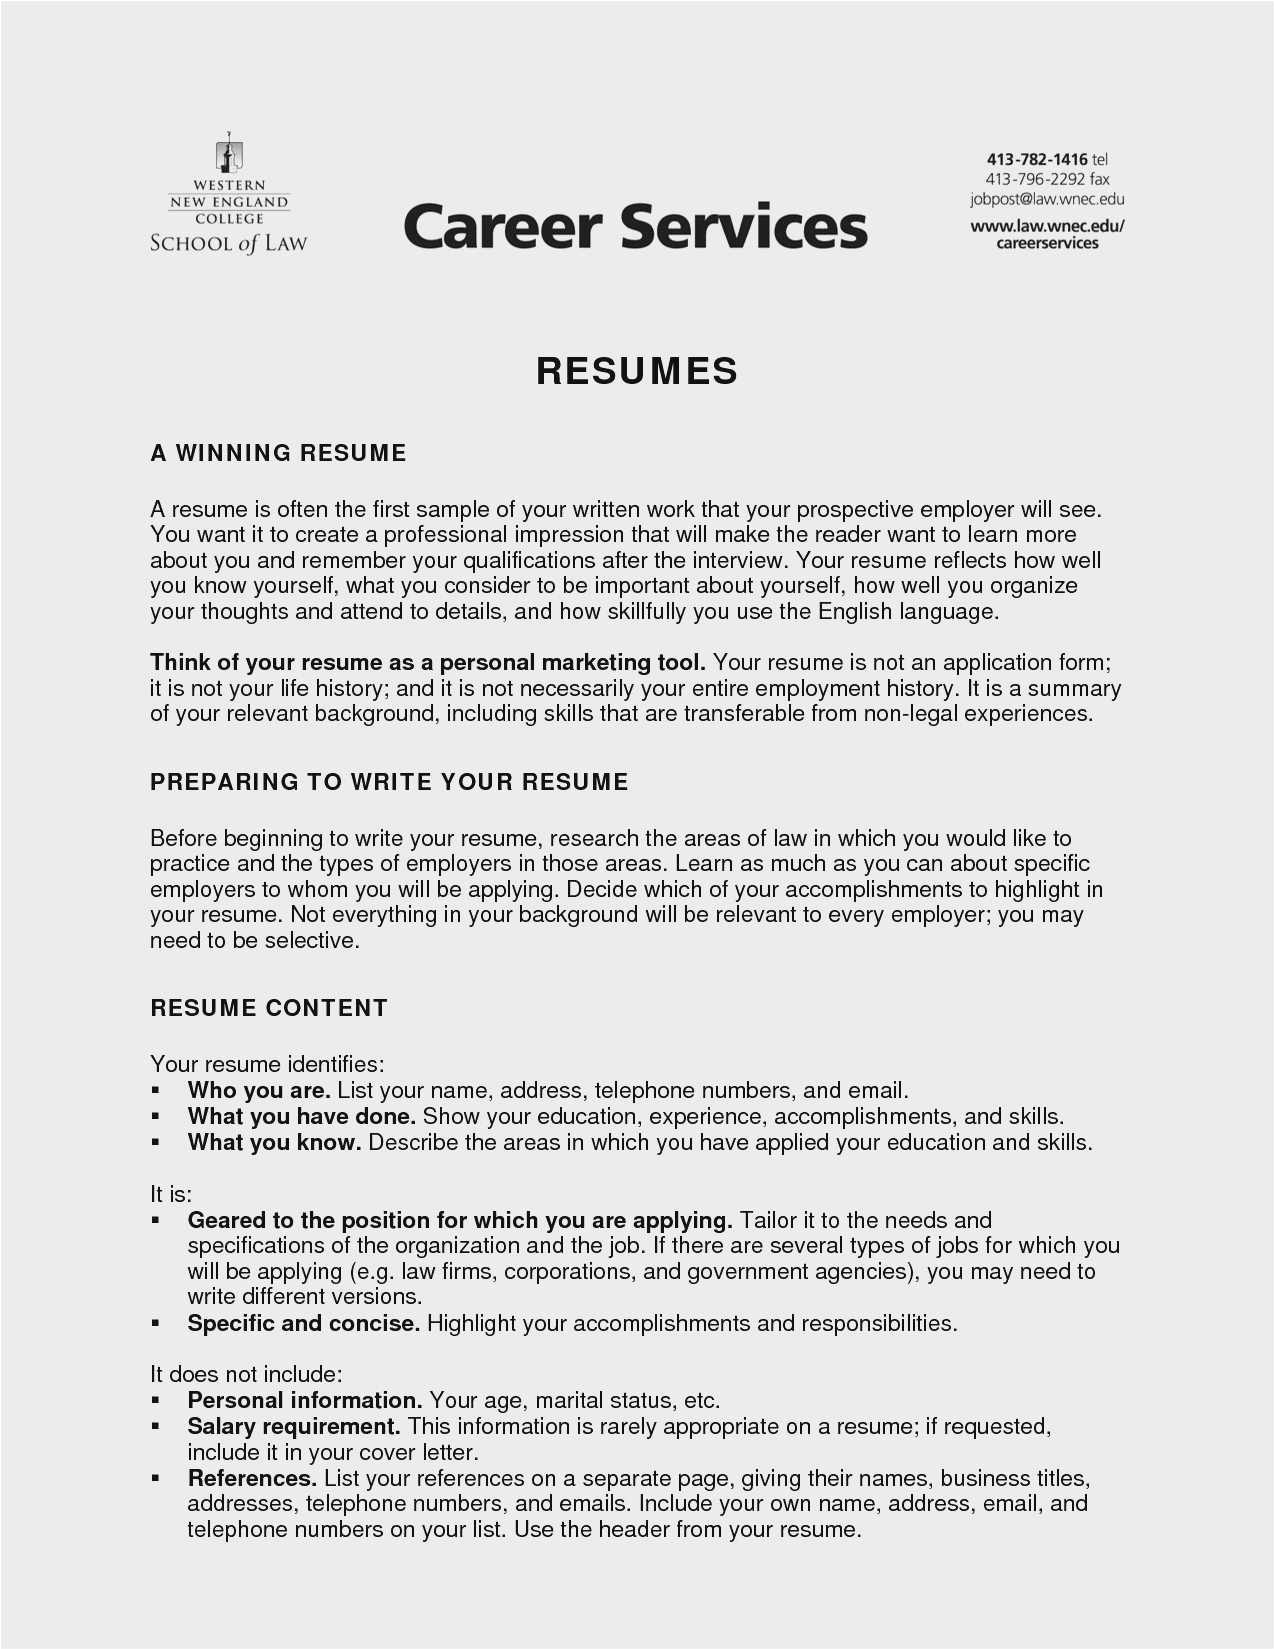 Sample Resume for Ged Recipients with No Experience Free 54 Relevant Experience Resume Model